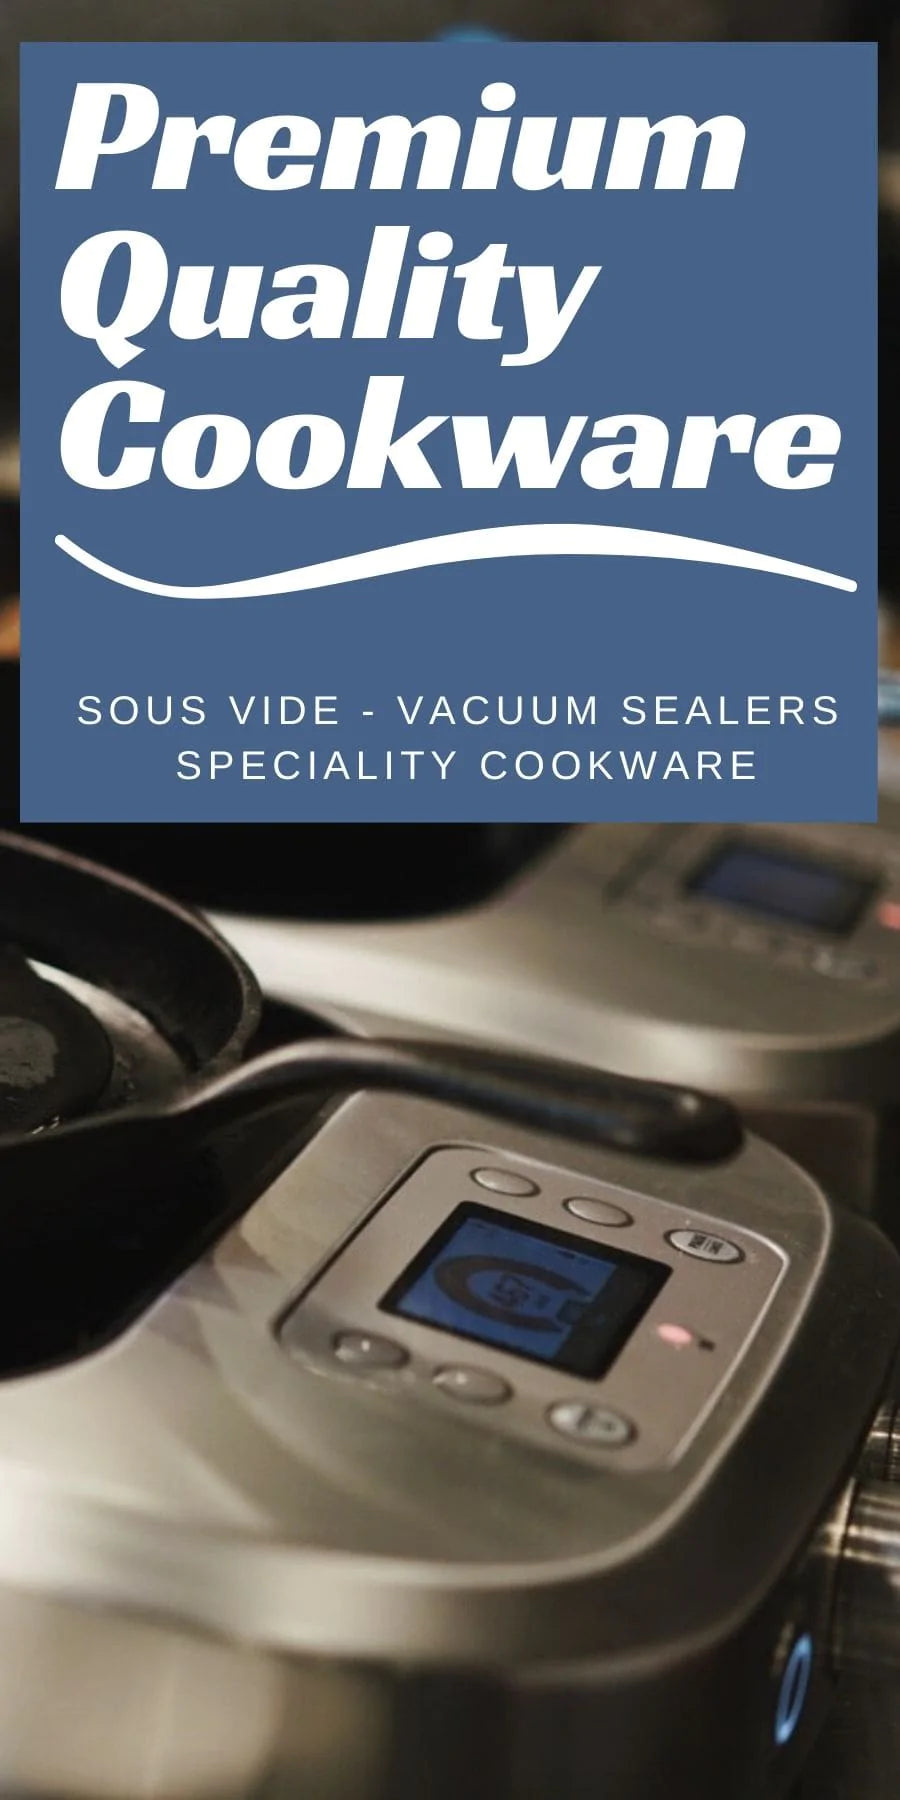 Australia's Best and Largest Range of Sous Vide Machines, Cryovac Machines Vacuum Sealers, Control Freak, SPpeciality Cookware, Smoking Gun Pro, Vacuum Sealer Bags and Rolls with over 890 great 5 star reviews